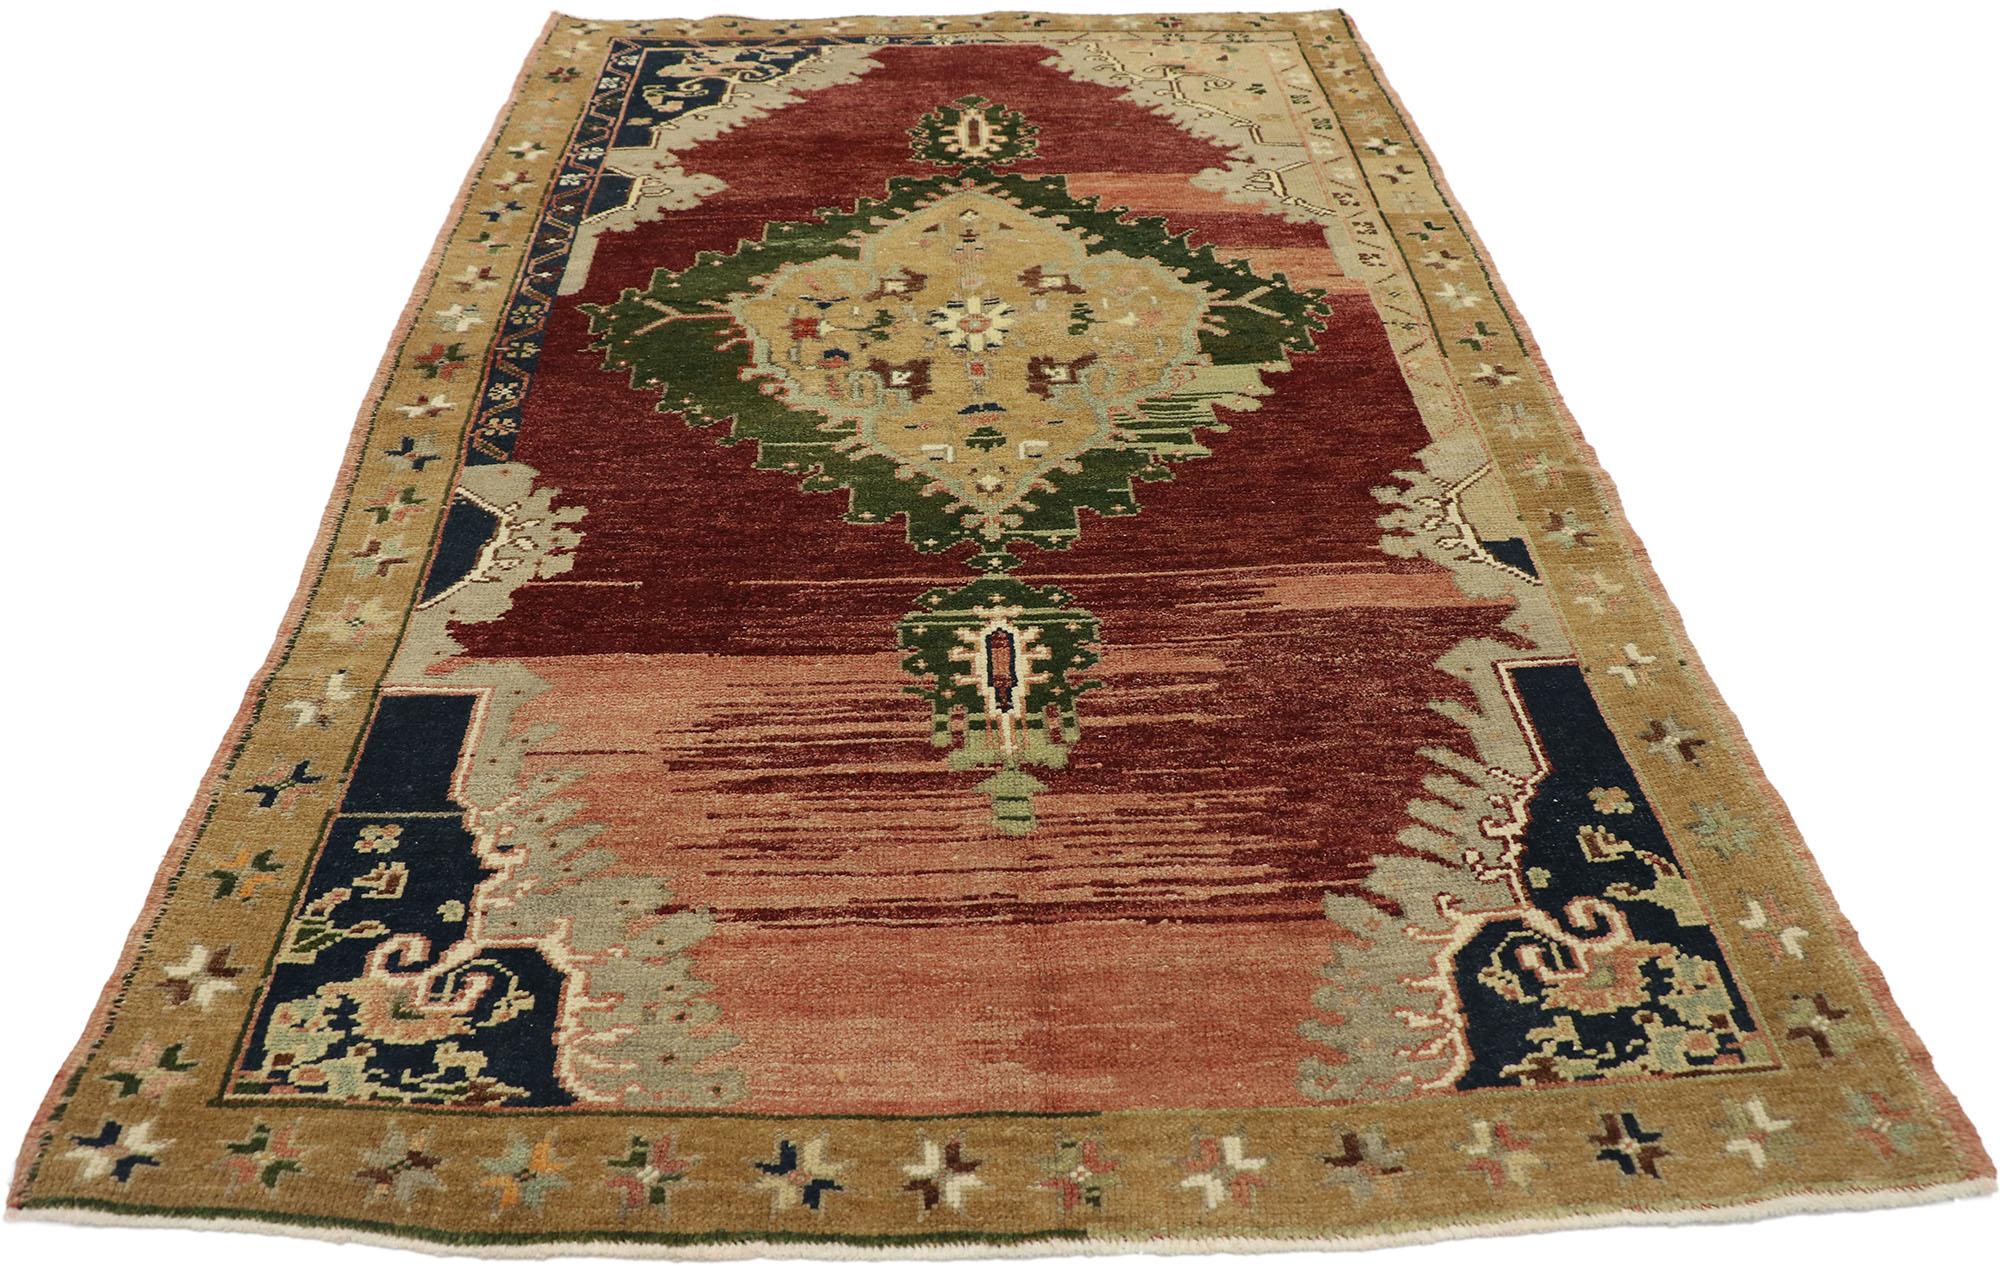 Vintage Turkish Oushak Rug with Victorian Gothic Style In Good Condition For Sale In Dallas, TX